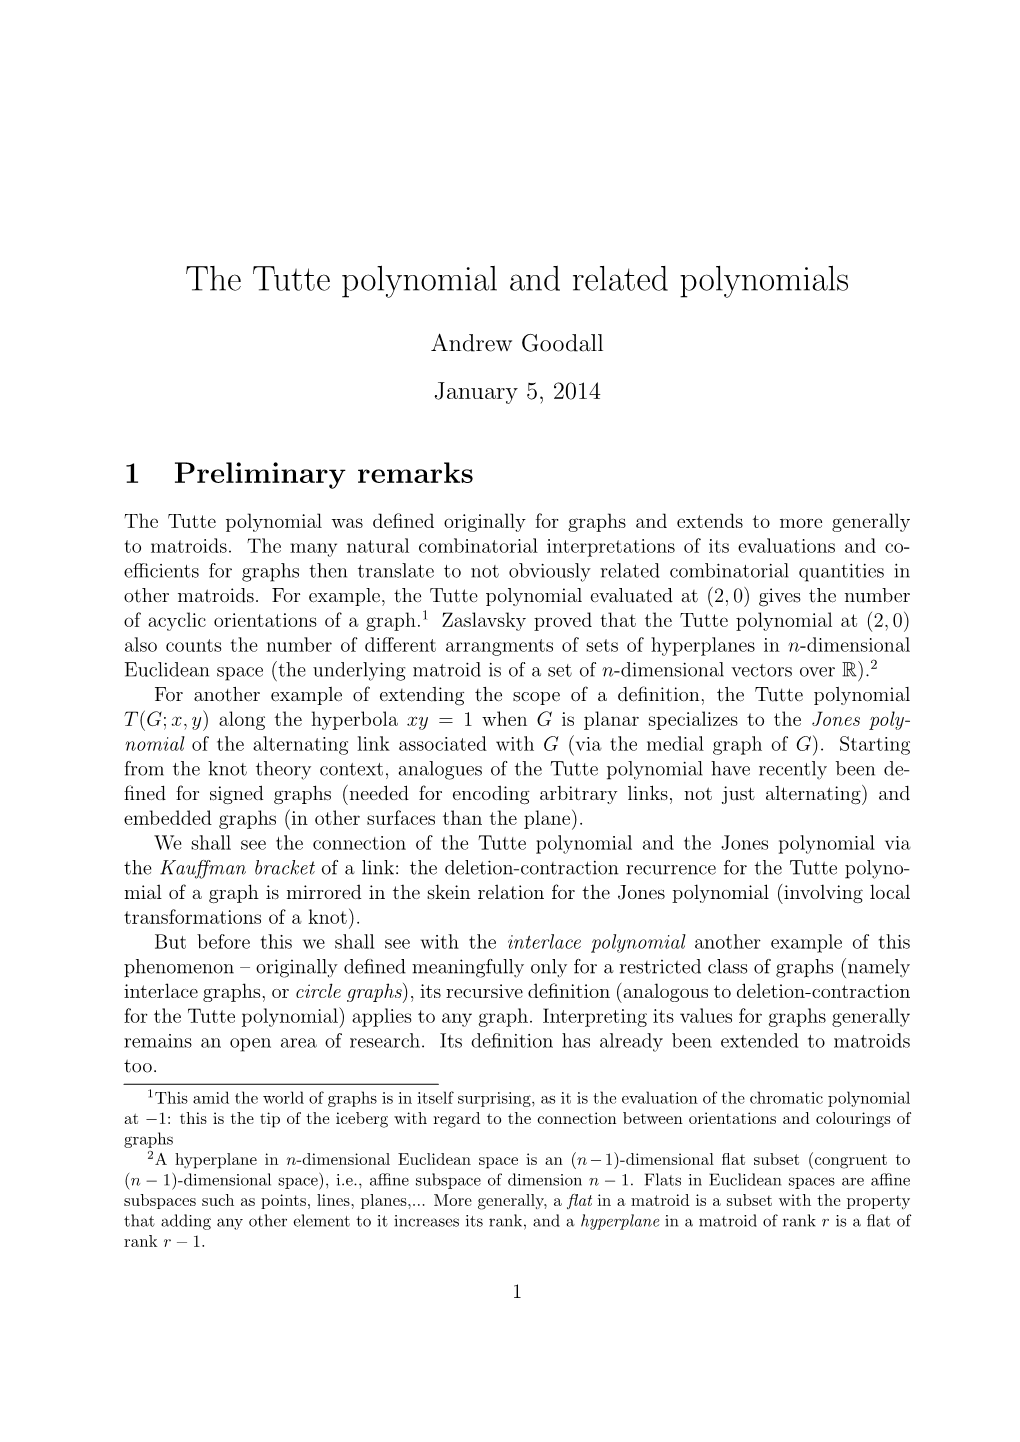 The Tutte Polynomial and Related Polynomials